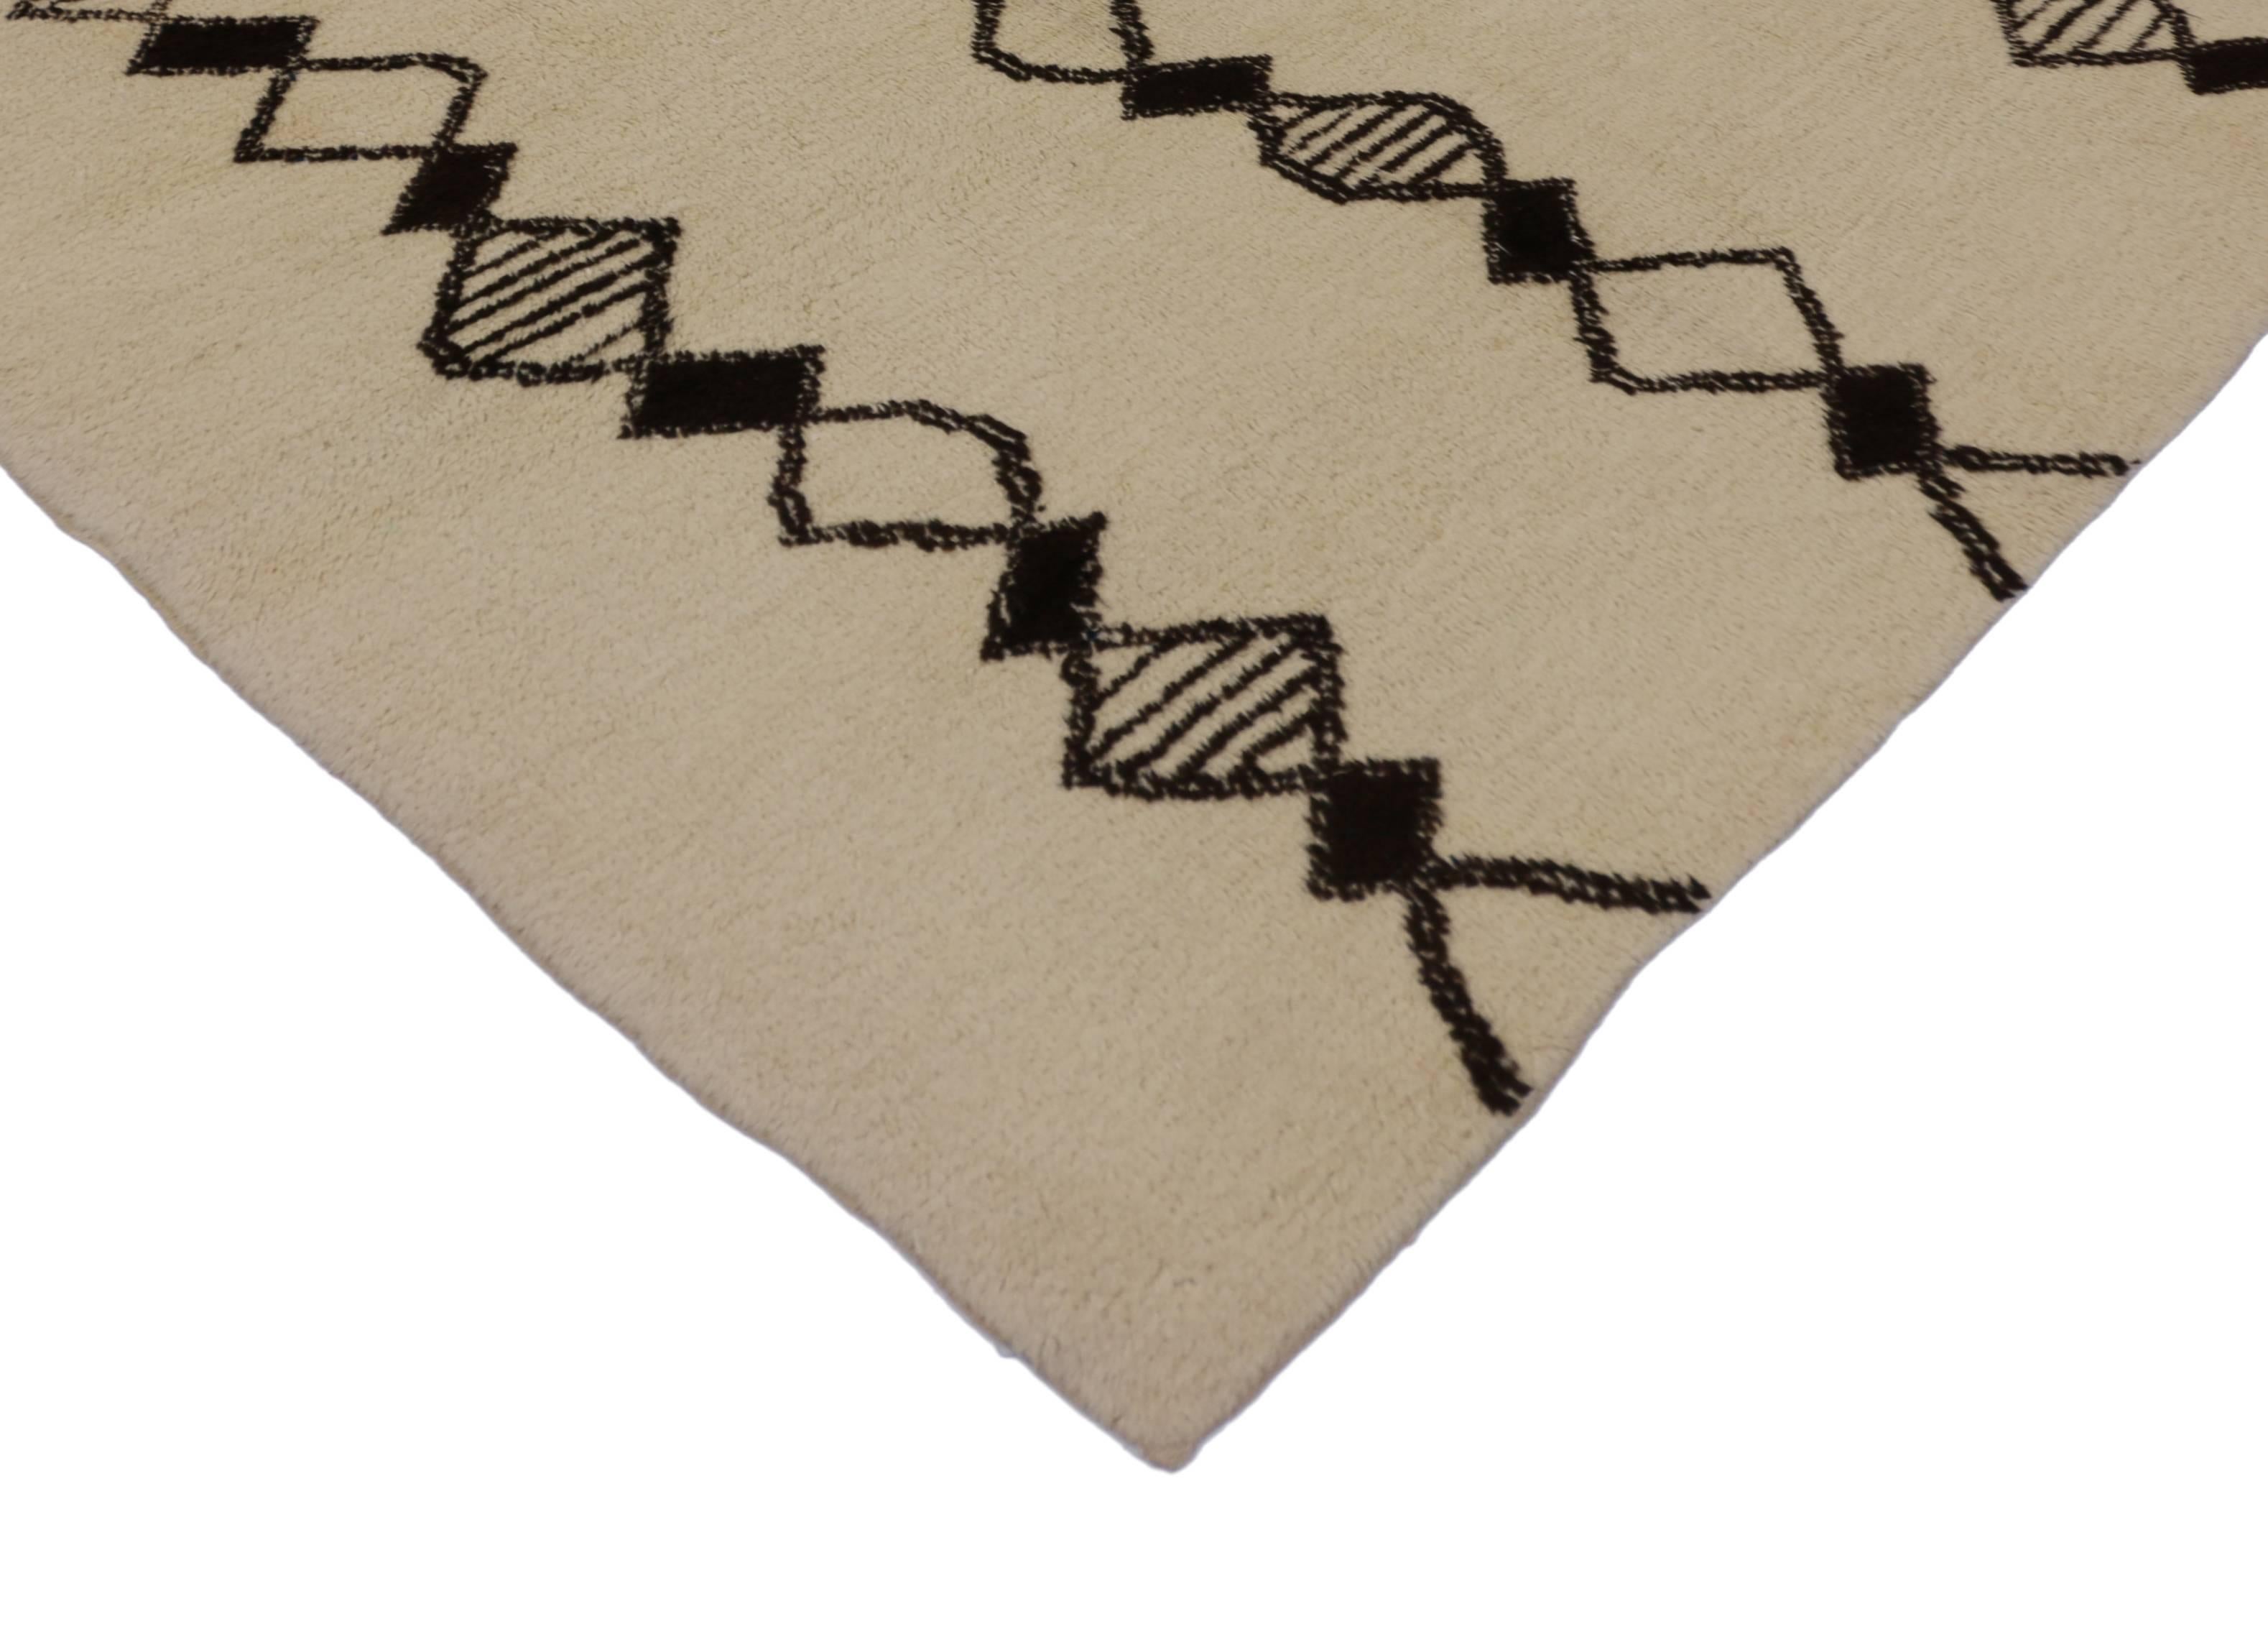 Contemporary Berber Moroccan Rug with Minimalist Bauhaus Style 2